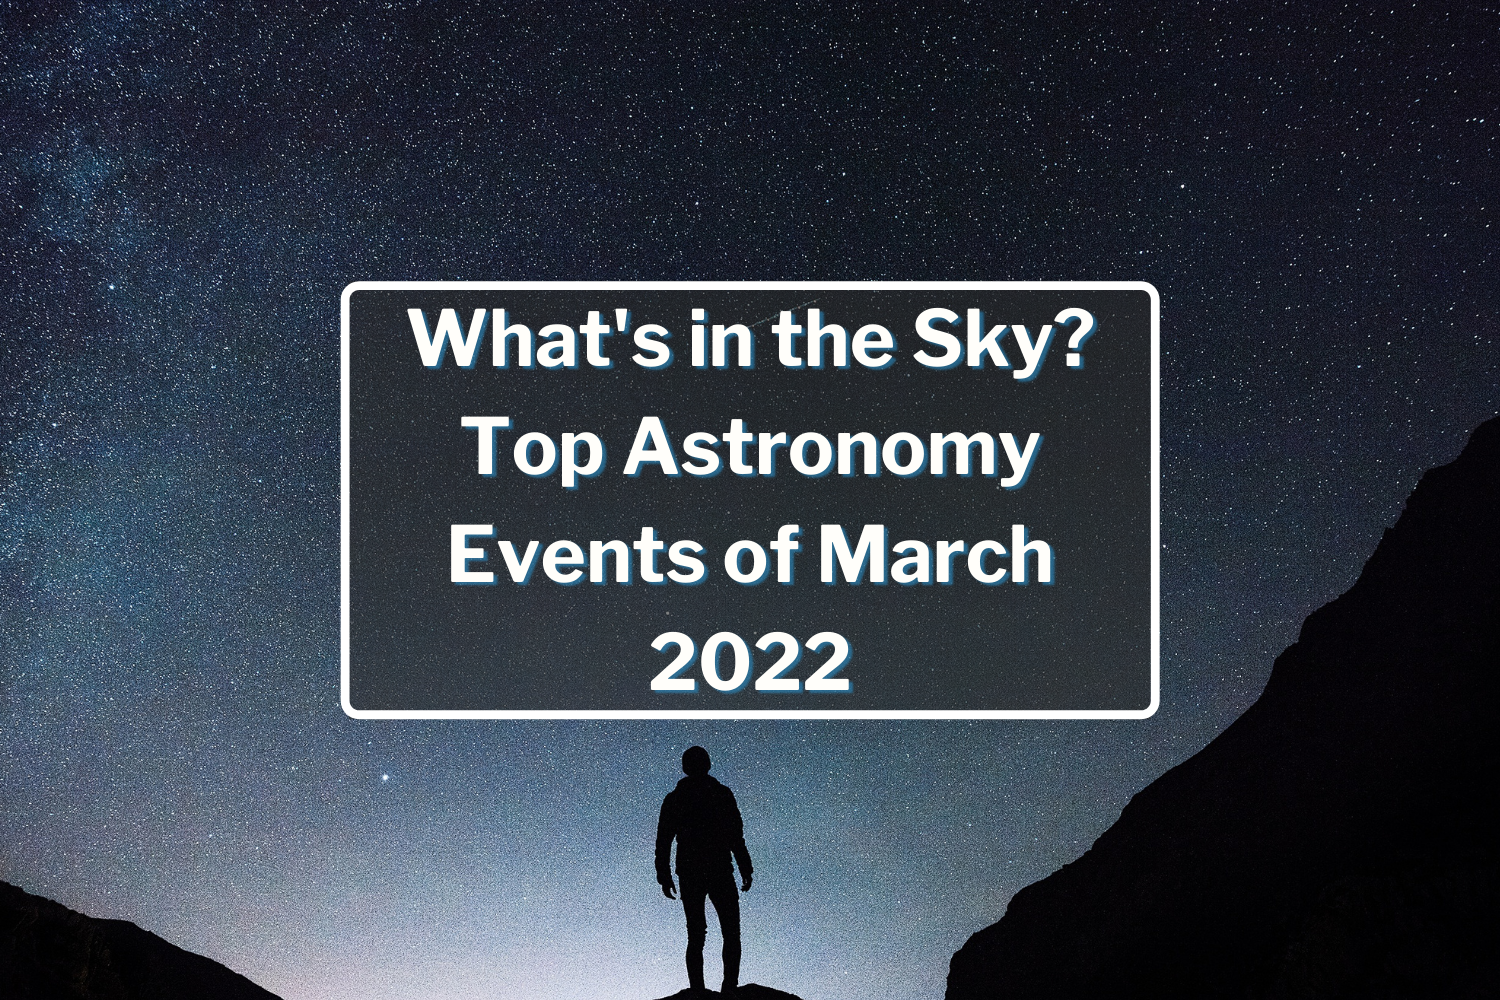 Top Astronomy Events of March 2022